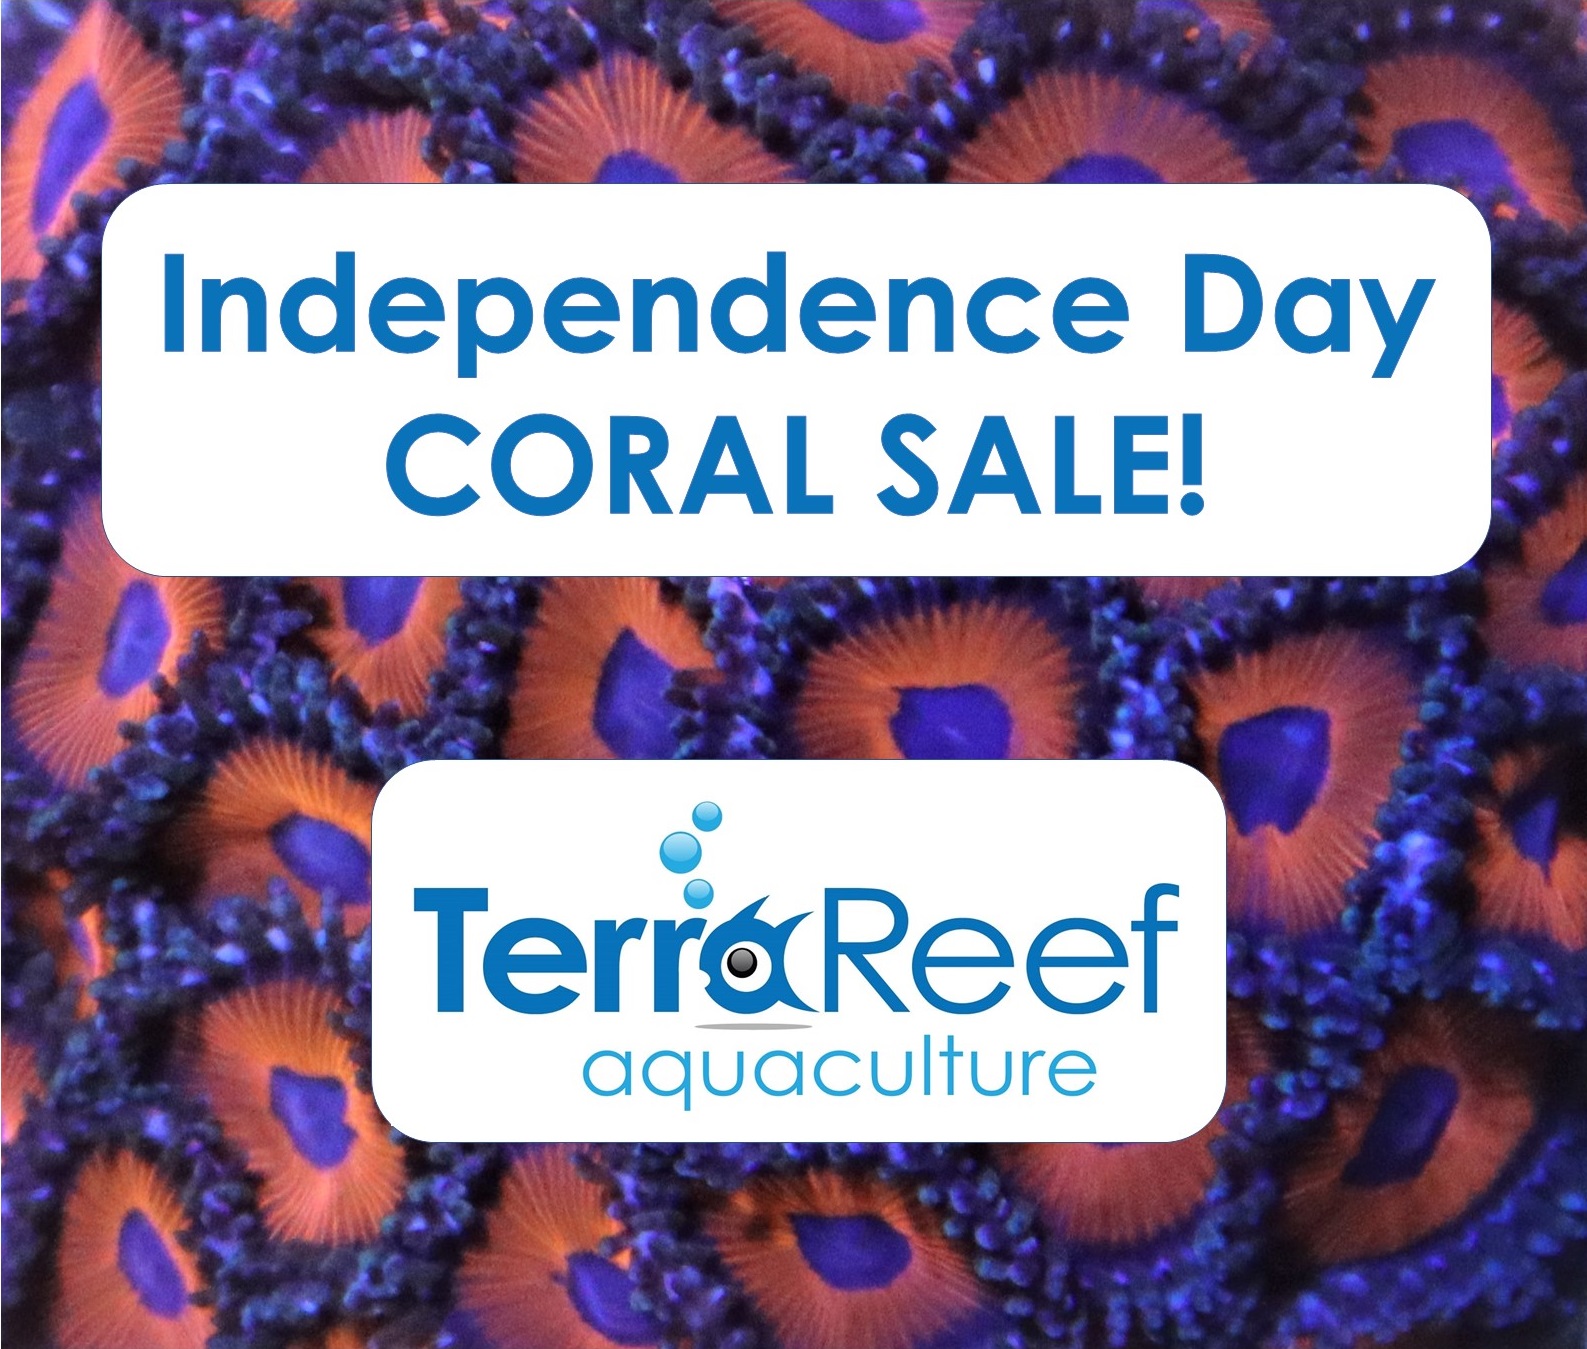 Aquacultured live coral for sale on sale 4th.jpg